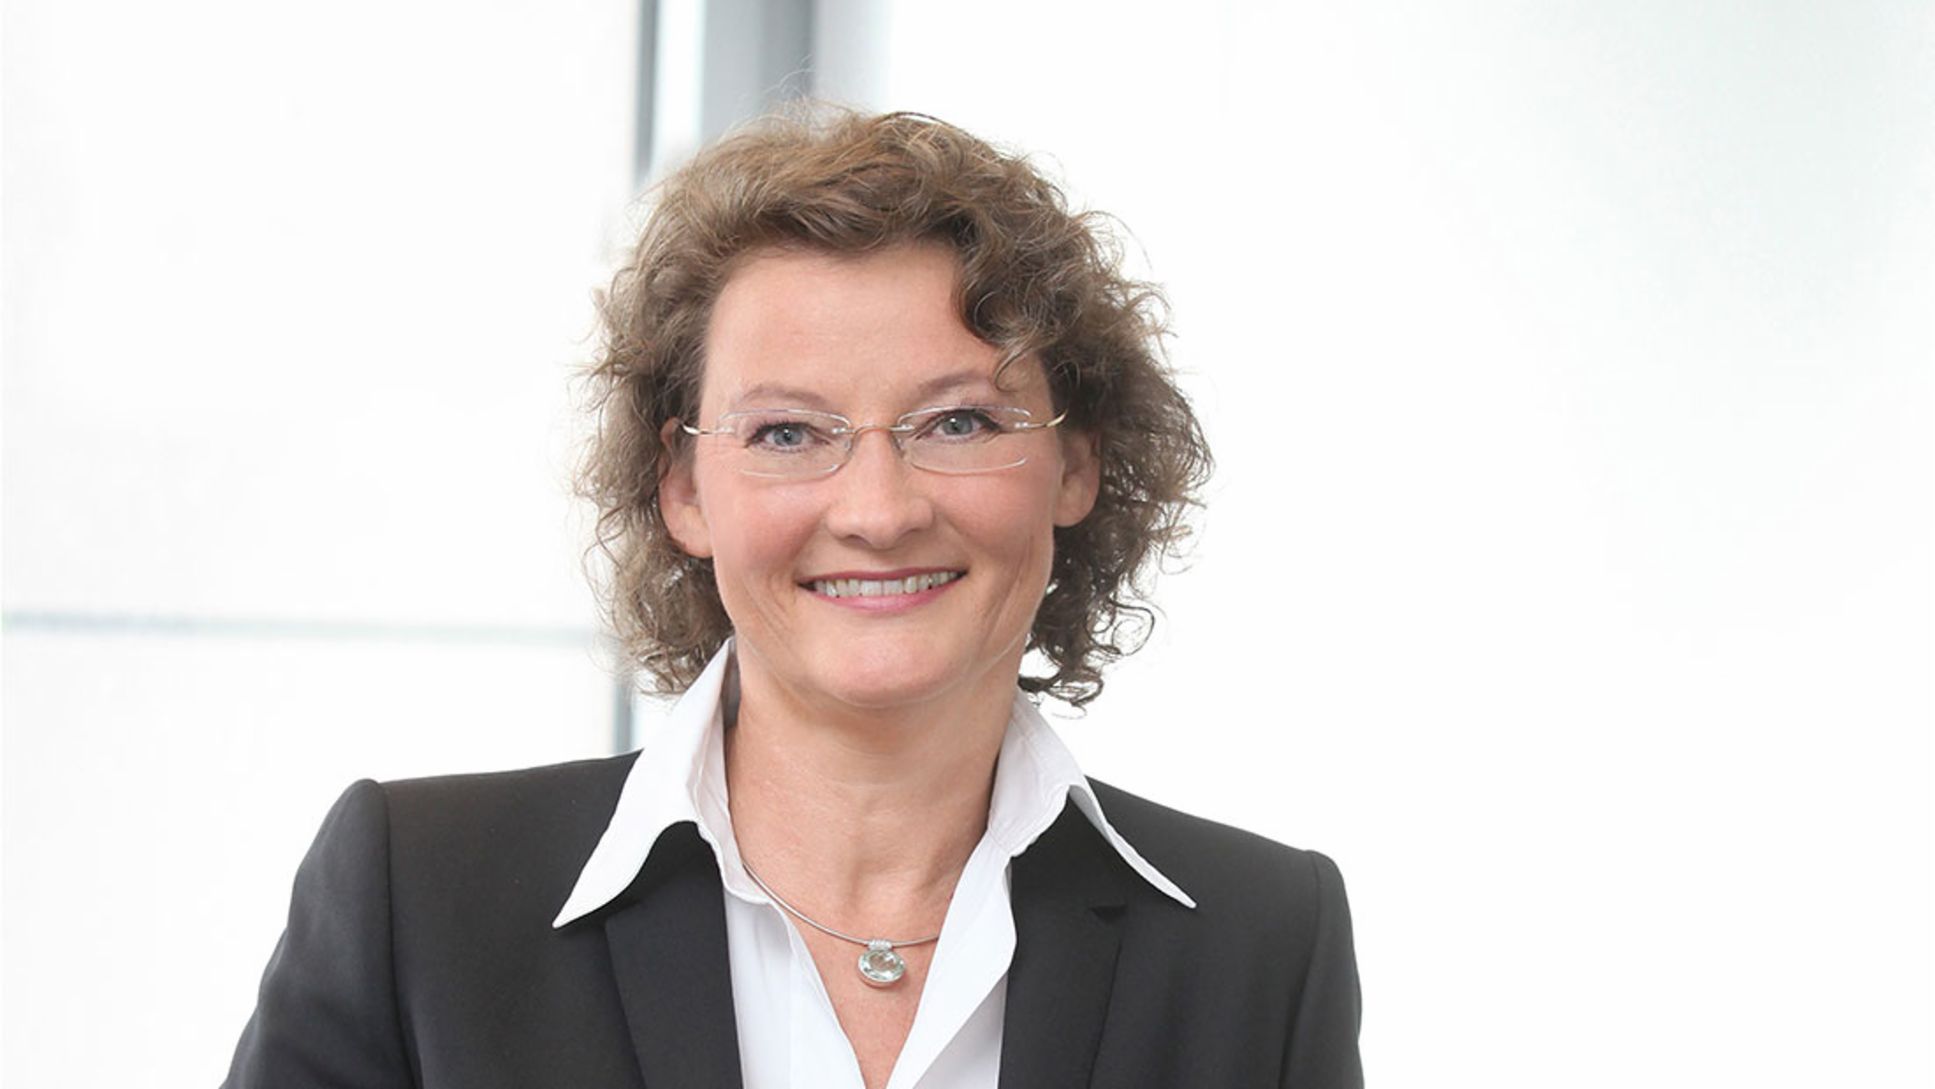 Dr Elke Eller, HR Executive Director of TUI AG and President of the German Federal Association of Human Resources Managers, 2017, Porsche Consulting GmbH